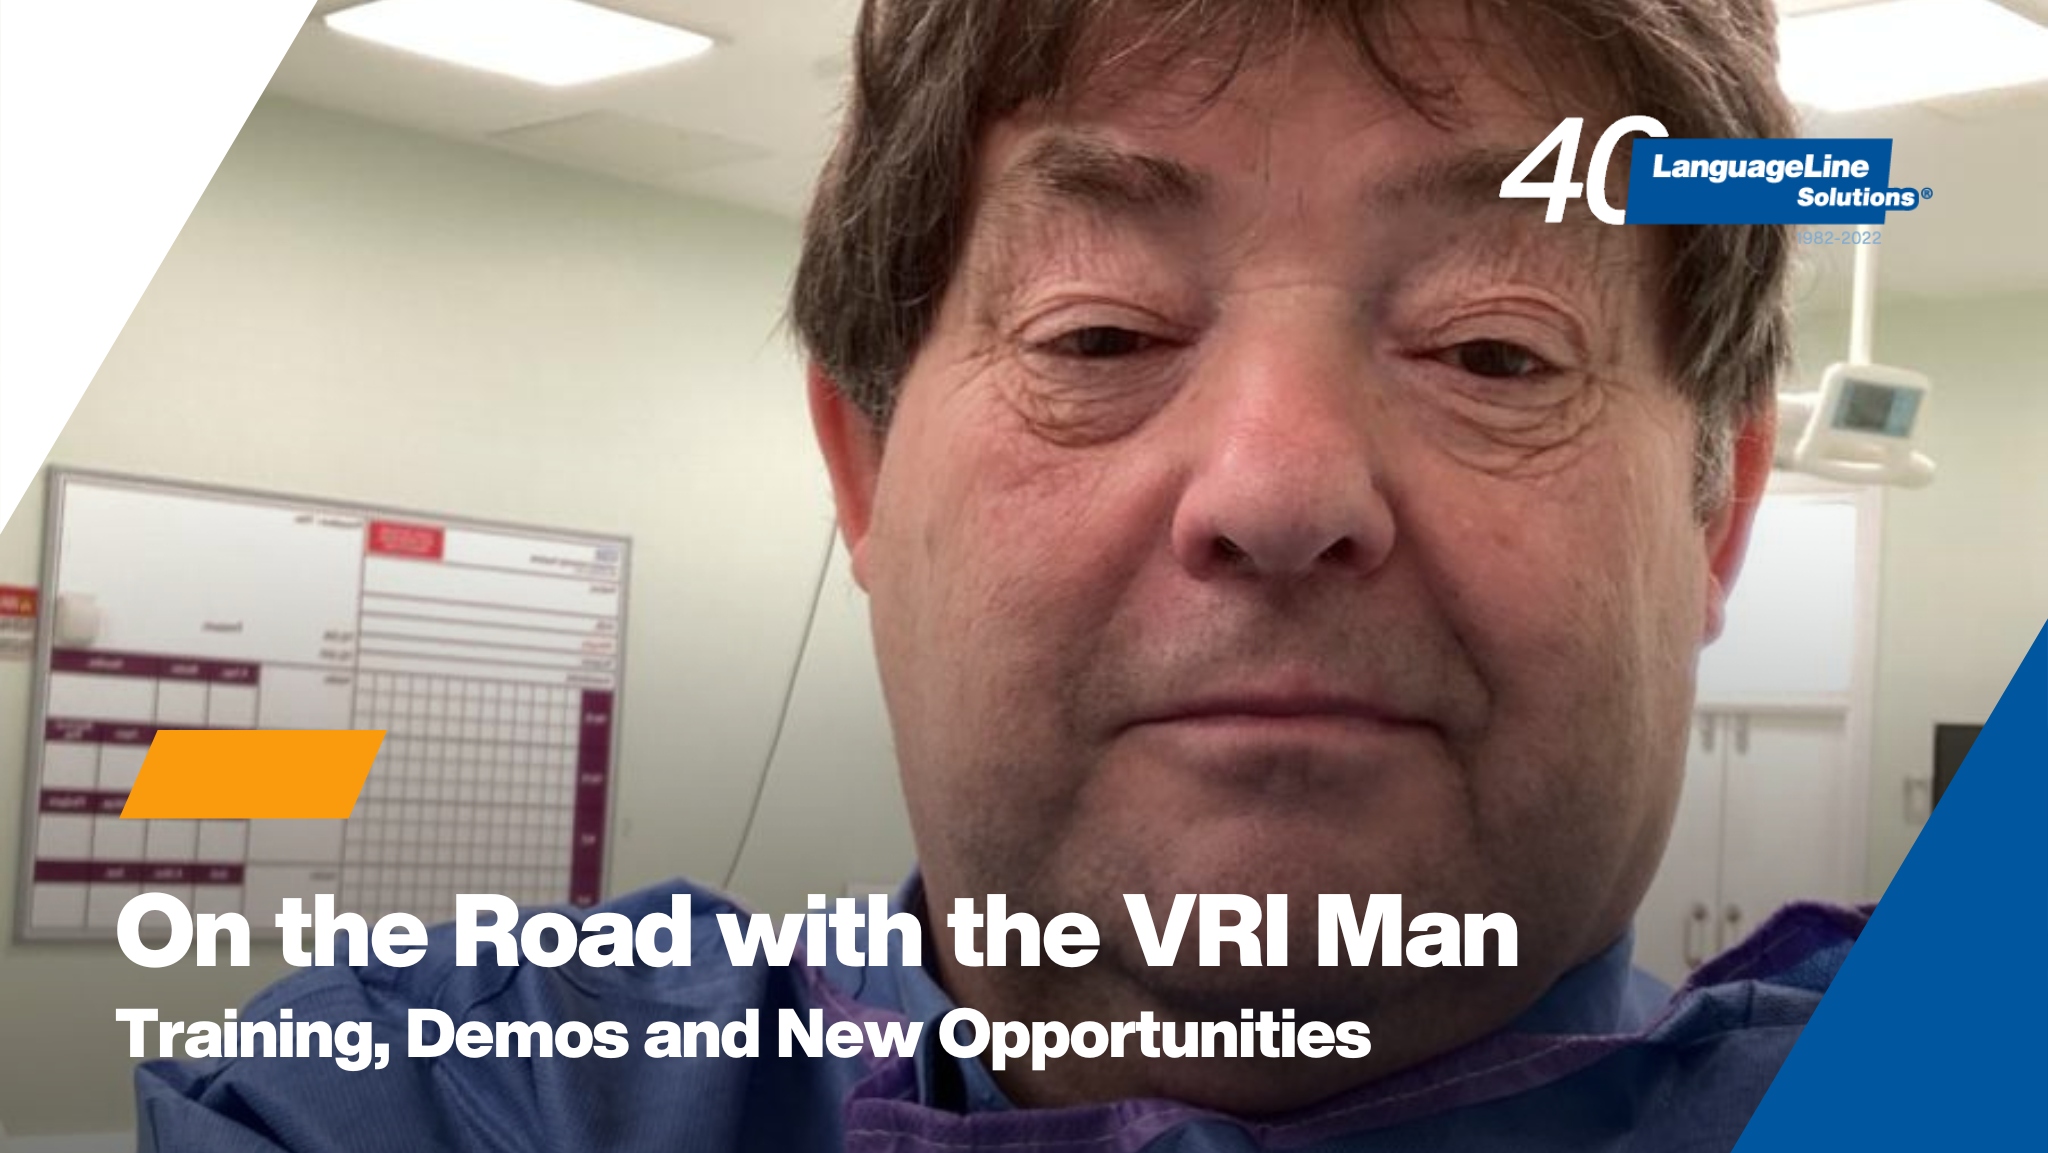 On the road with the VRI man